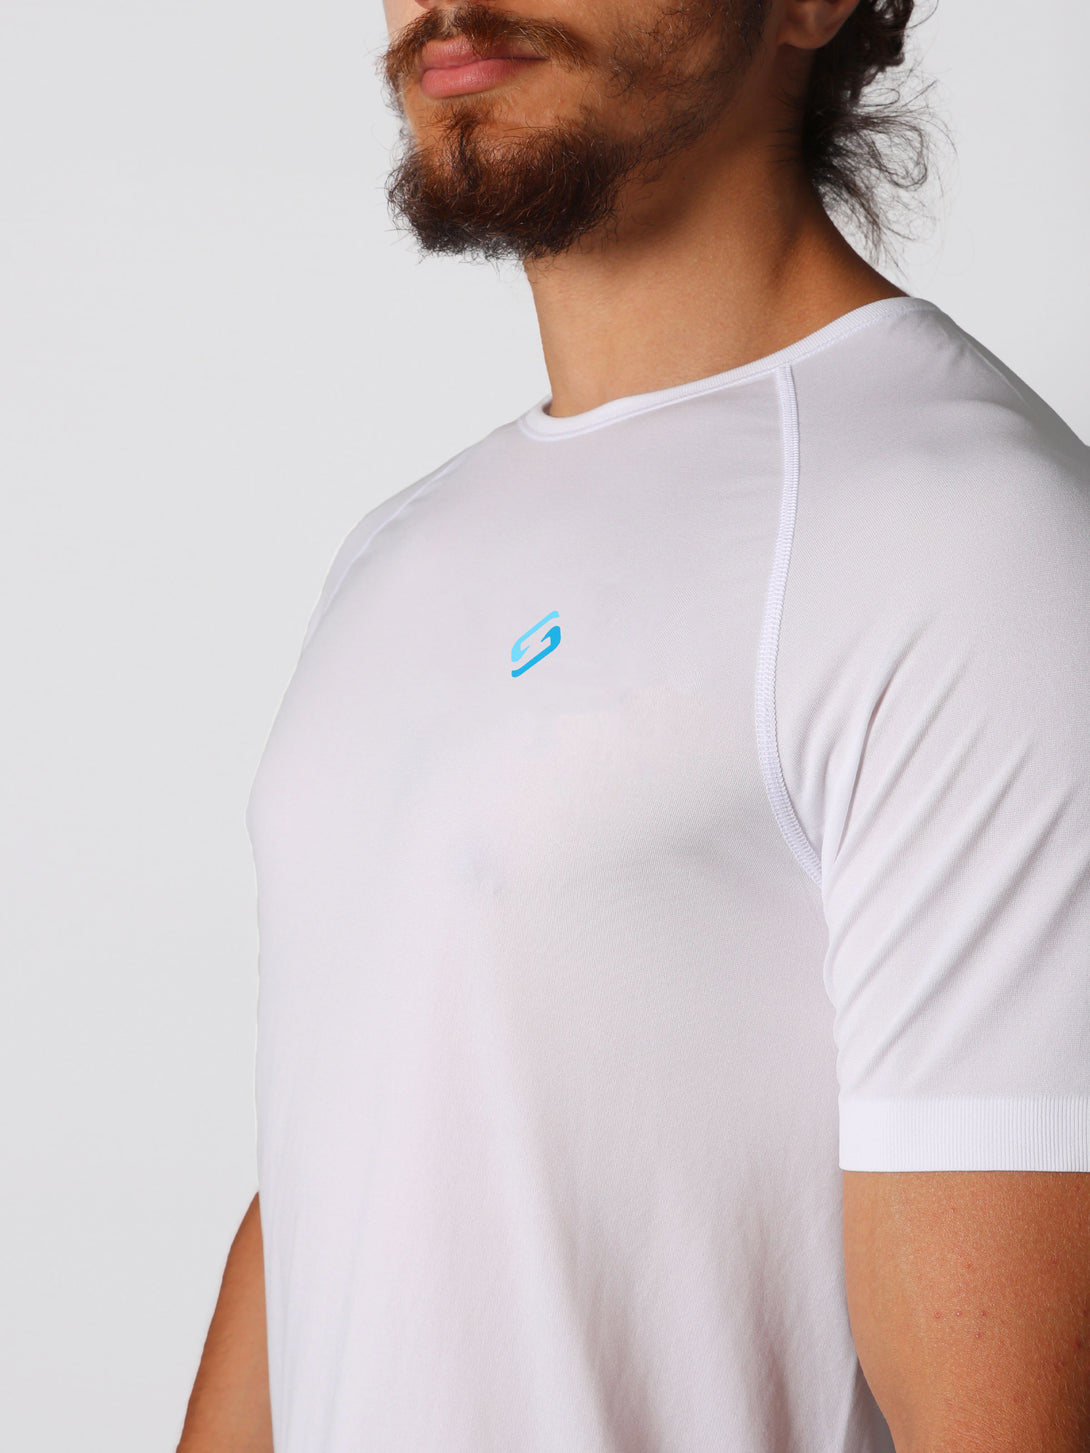 A Man Wearing White Color Seamless The Motion T-Shirt